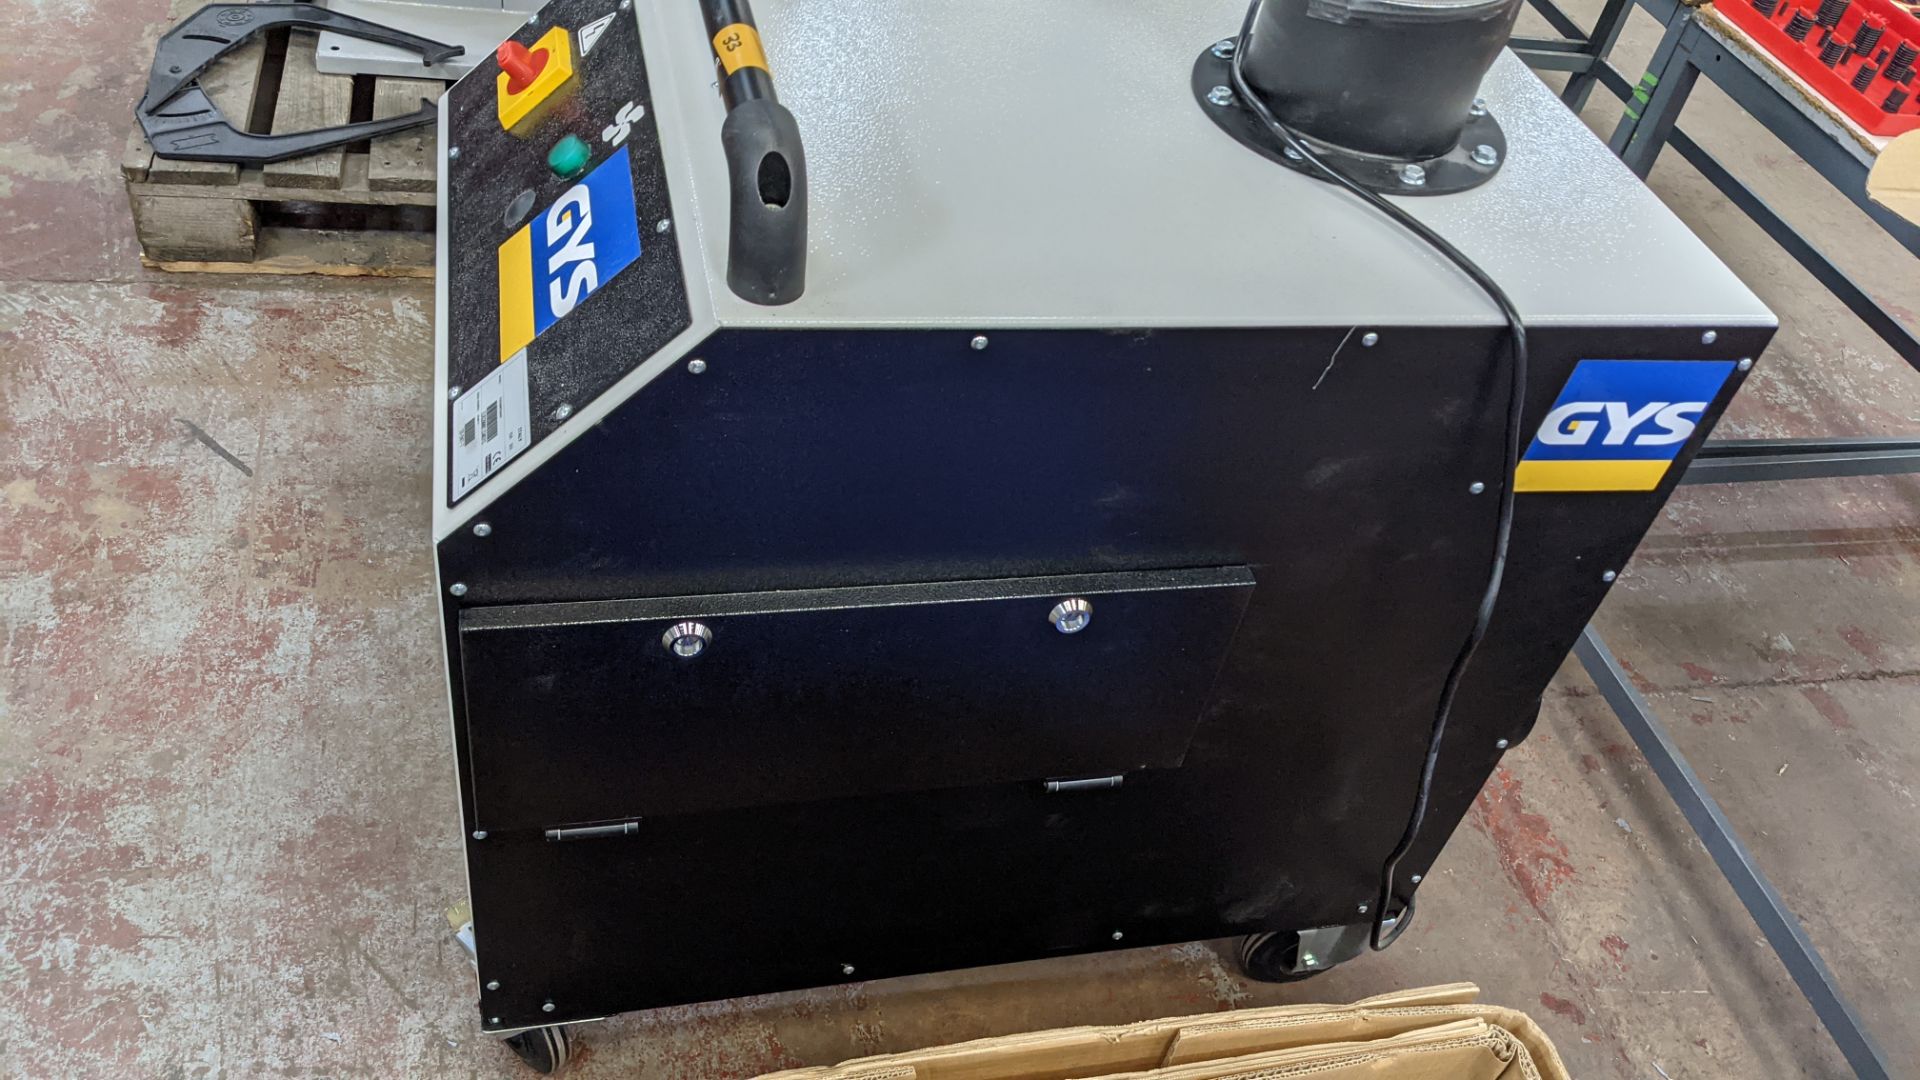 2019 GYS EVO 2000T 150 GYS mobile fume extractor - Image 8 of 12